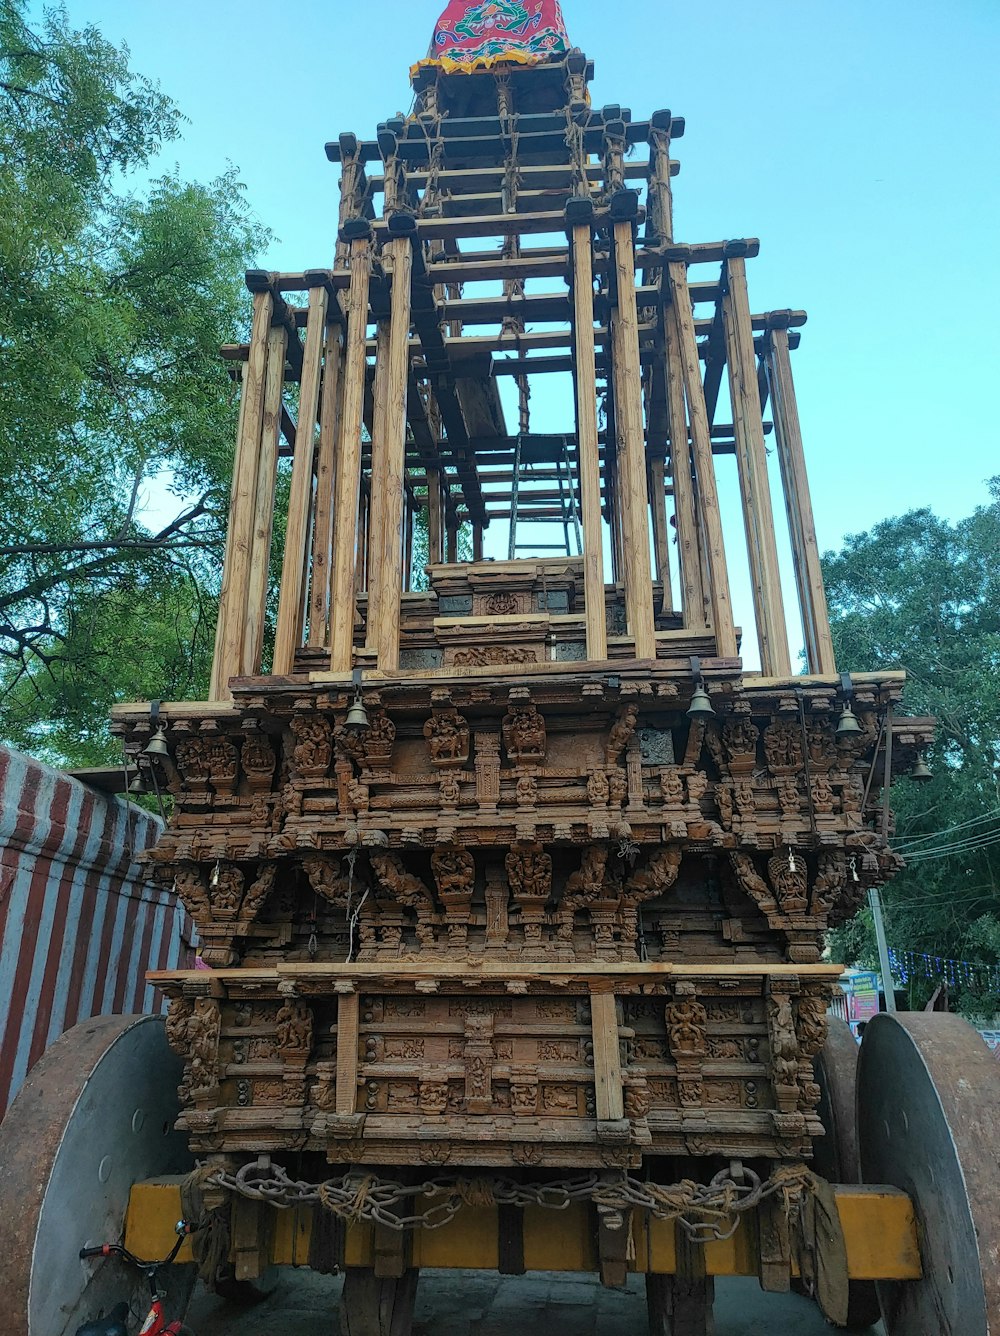 a large wooden structure sitting on top of a truck